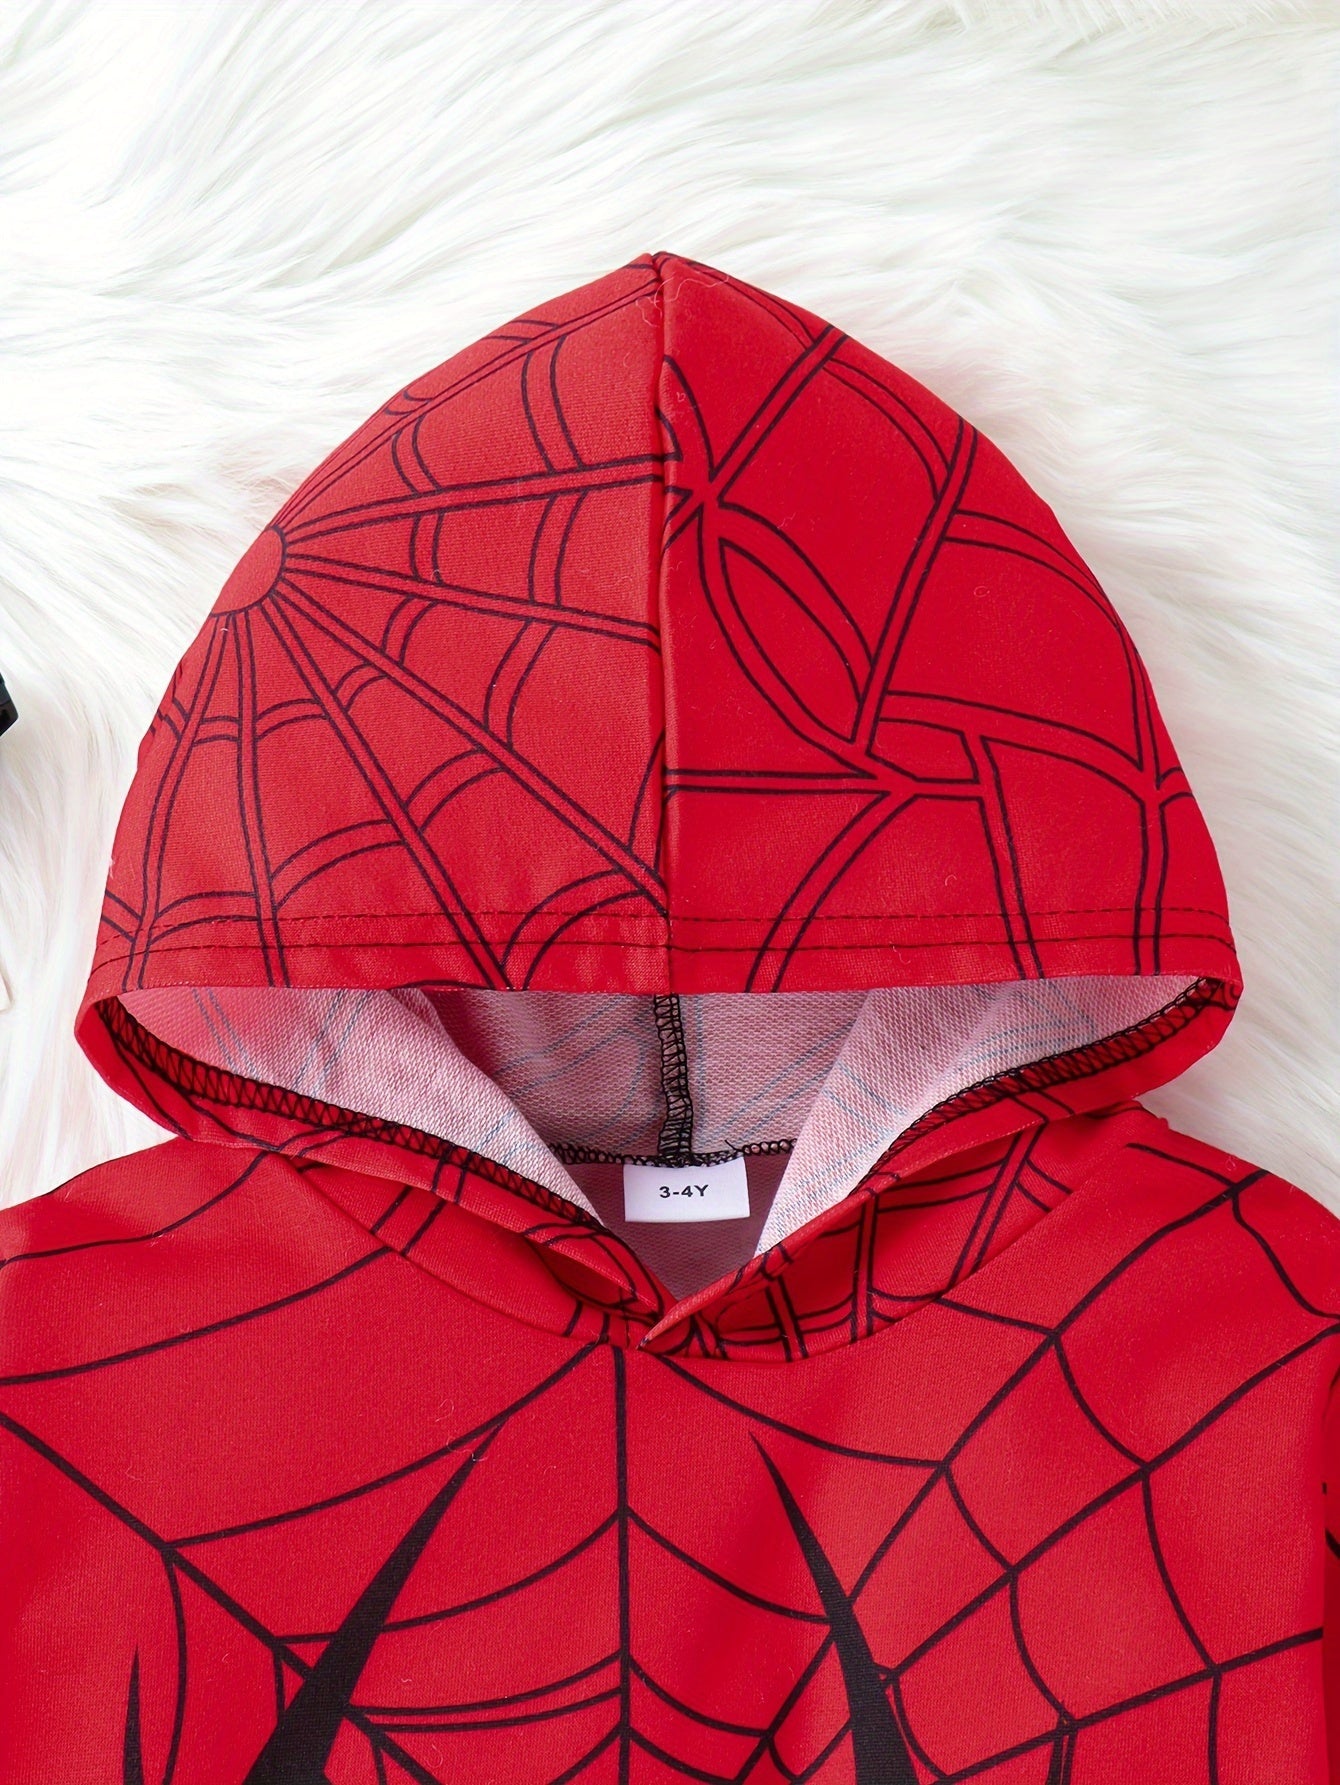 2pcs Boy's cartoon Spider Print Hooded Thin Outfit, Web Pattern Thin Hoodie & Pants Set, Kid's Clothes For Spring fall, As Gift - Ammpoure Wellbeing